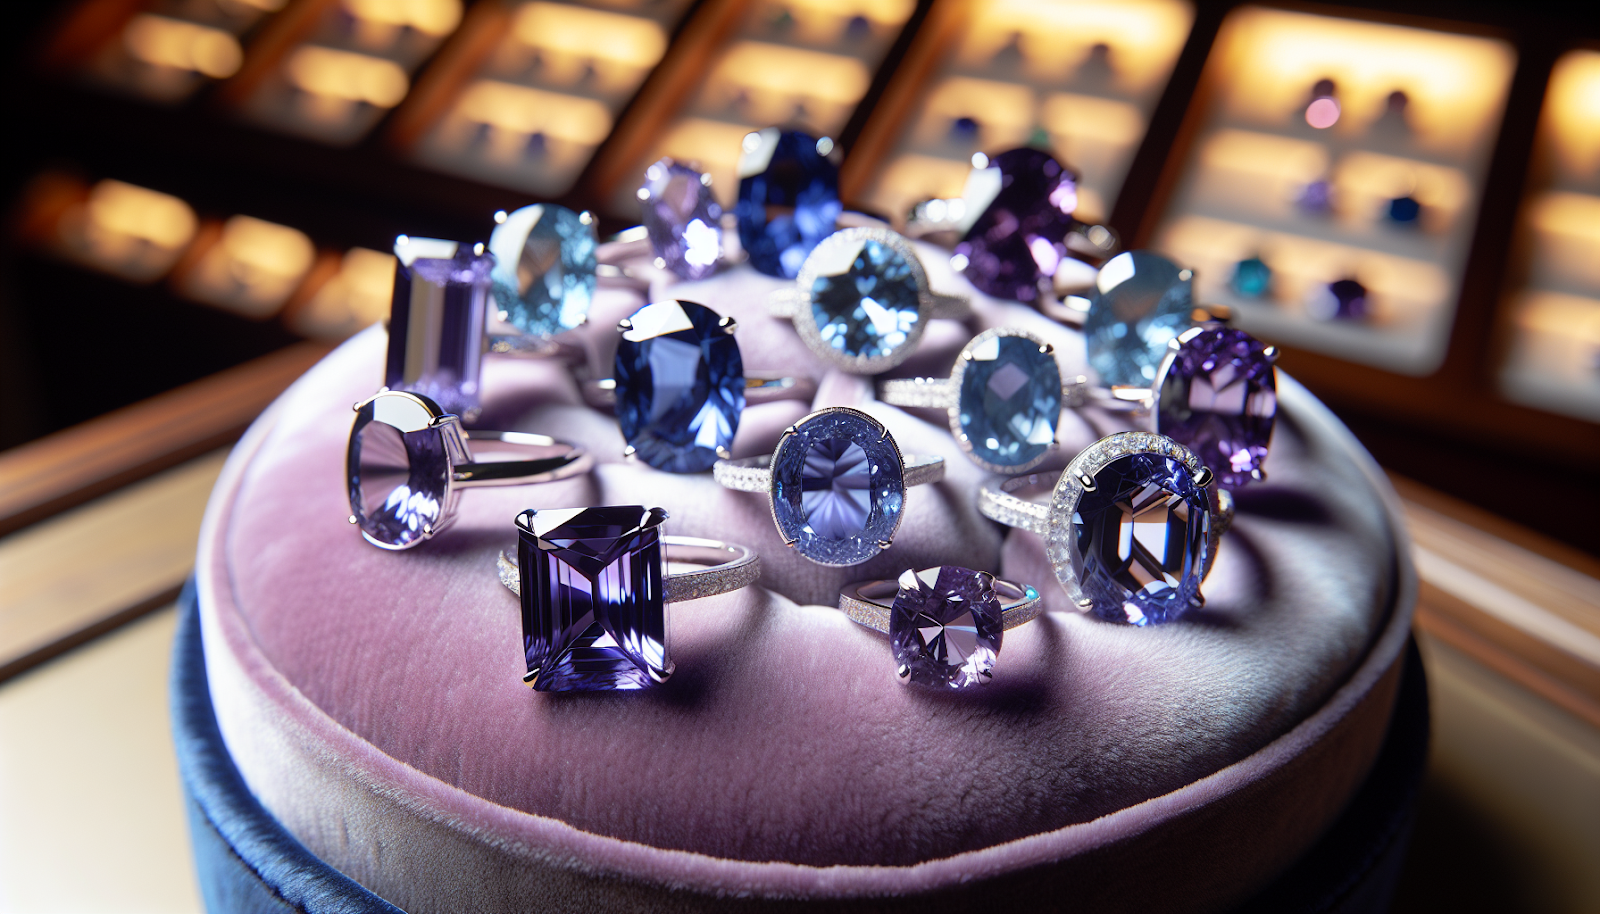 Choosing an iolite gemstone ring based on cut, color, and clarity